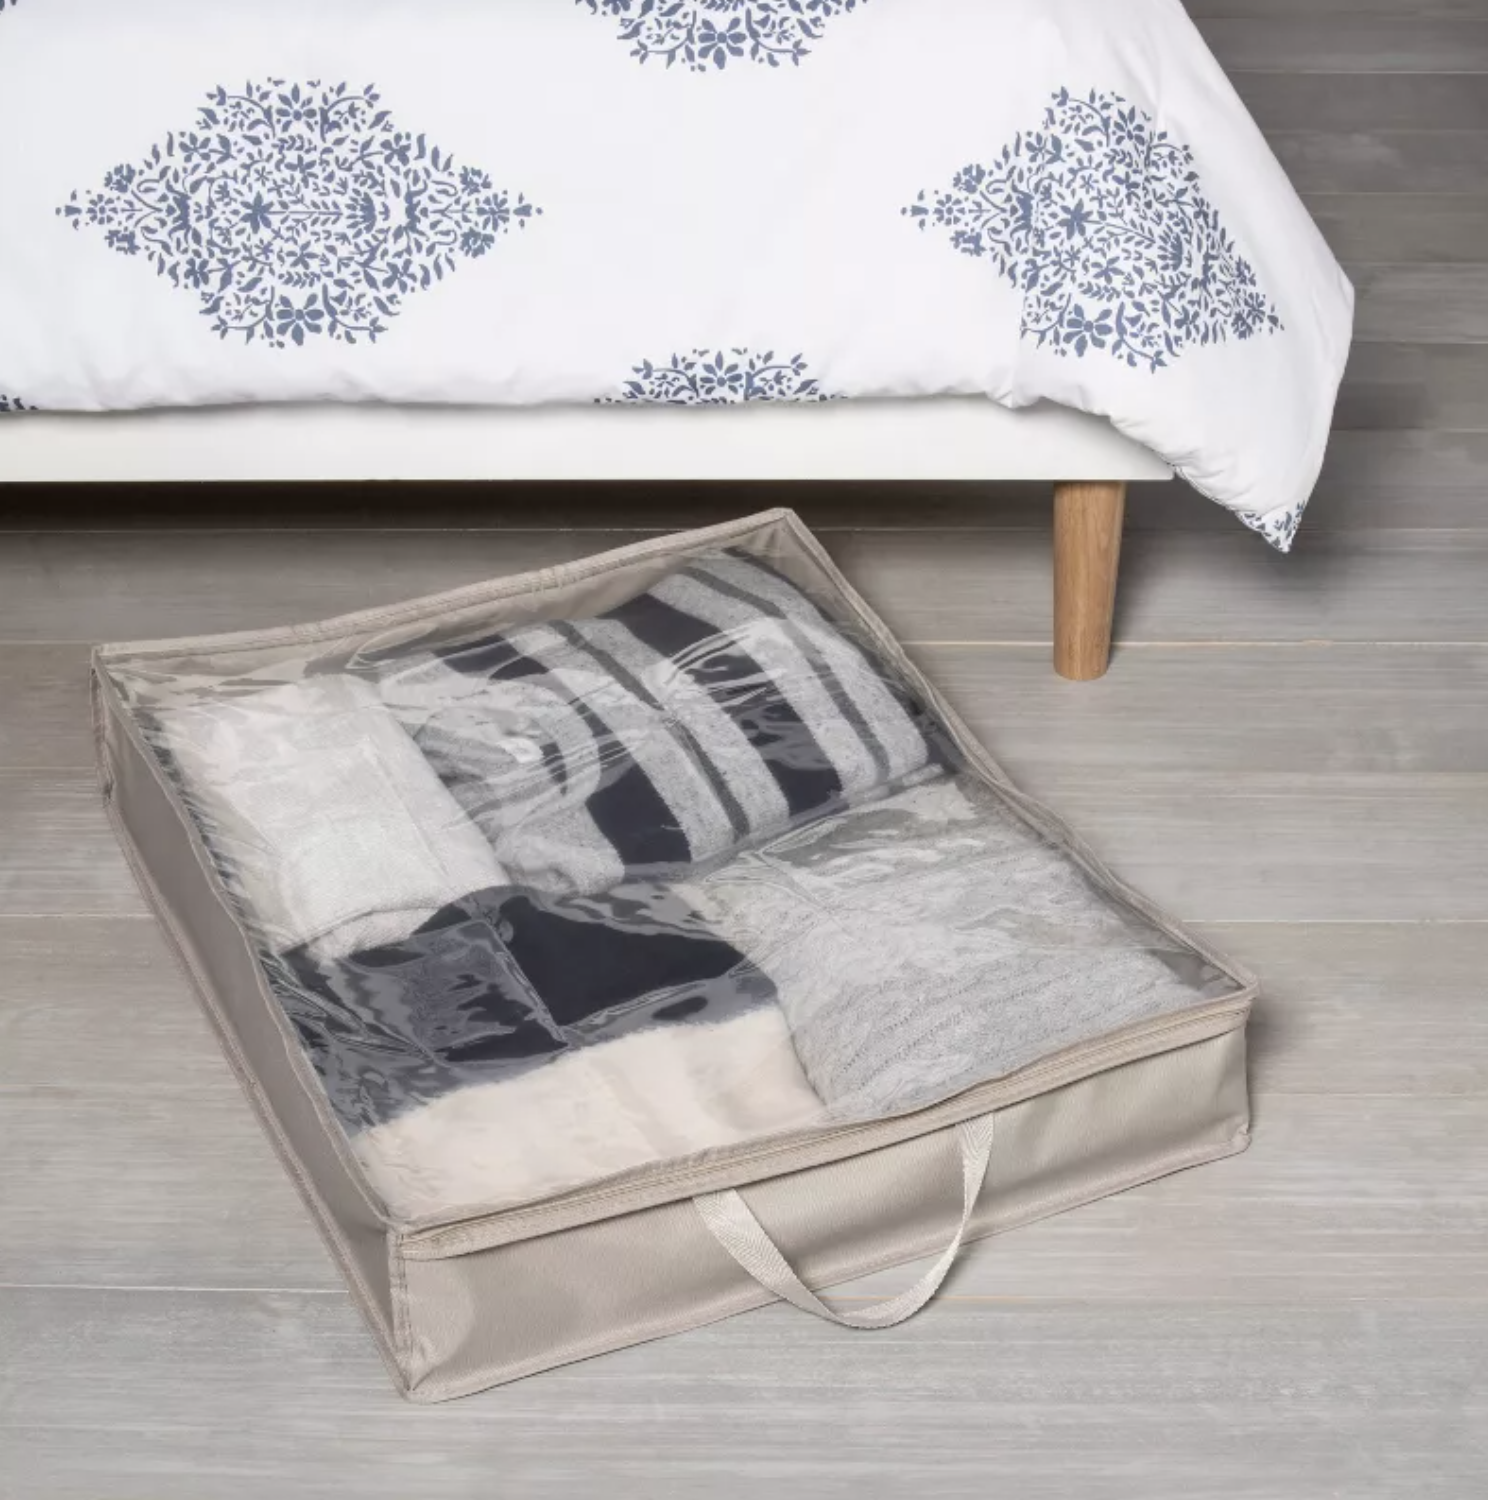 storage box with clothes inside right next to a bed it can fit underneath